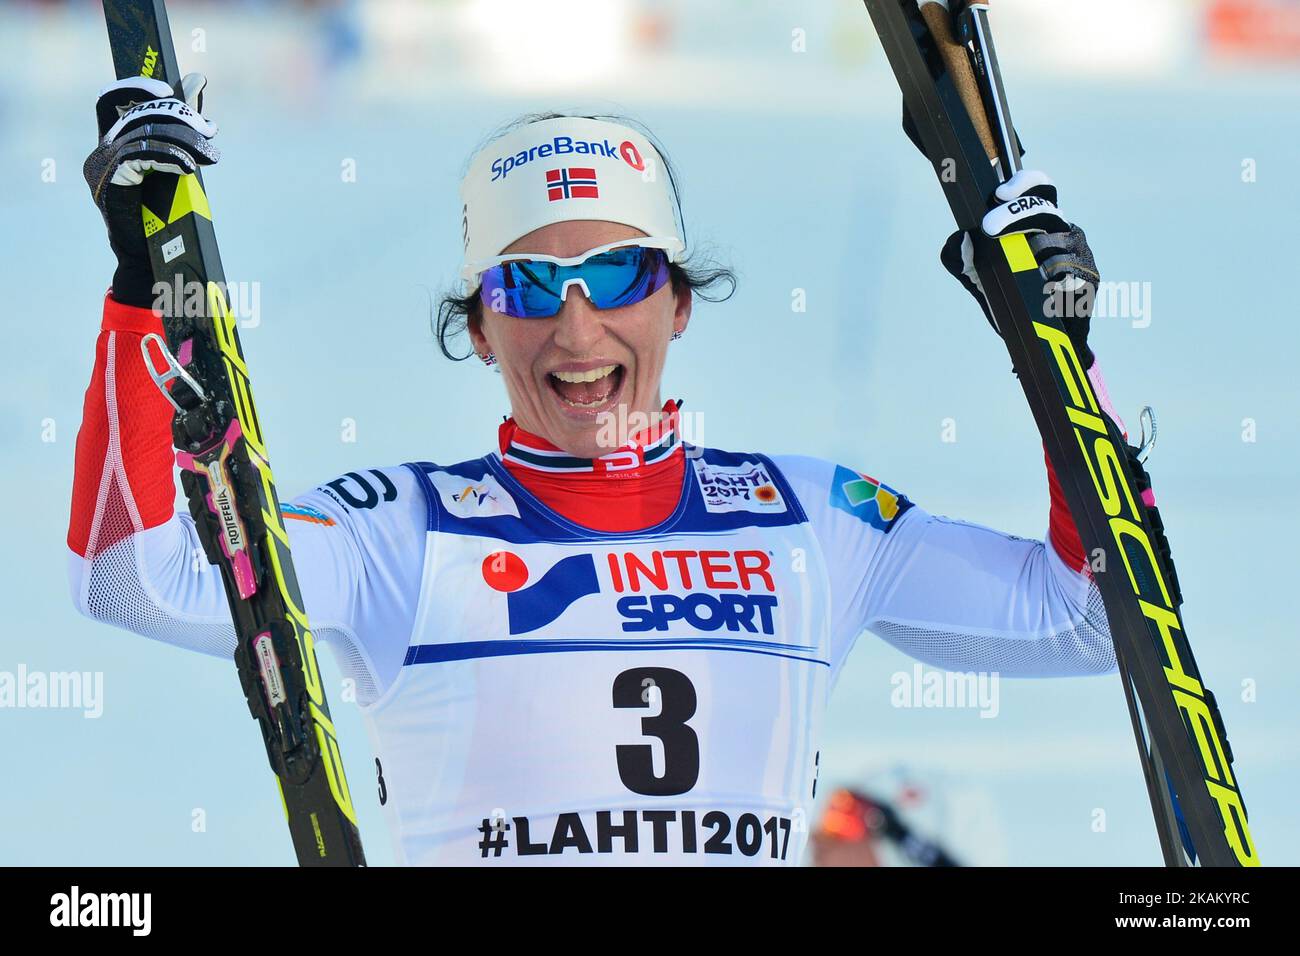 Marit Bjoergen from Norway celebrates after she wins Ladies cross-country 30 km Mass Start Free and her FOURTH GOLD MEDAL, at FIS Nordic World Ski Championship 2017 in Lahti. On Saturday, March 04, 2017, in Lahti, Finland. Photo by Artur Widak *** Please Use Credit from Credit Field ***  Stock Photo